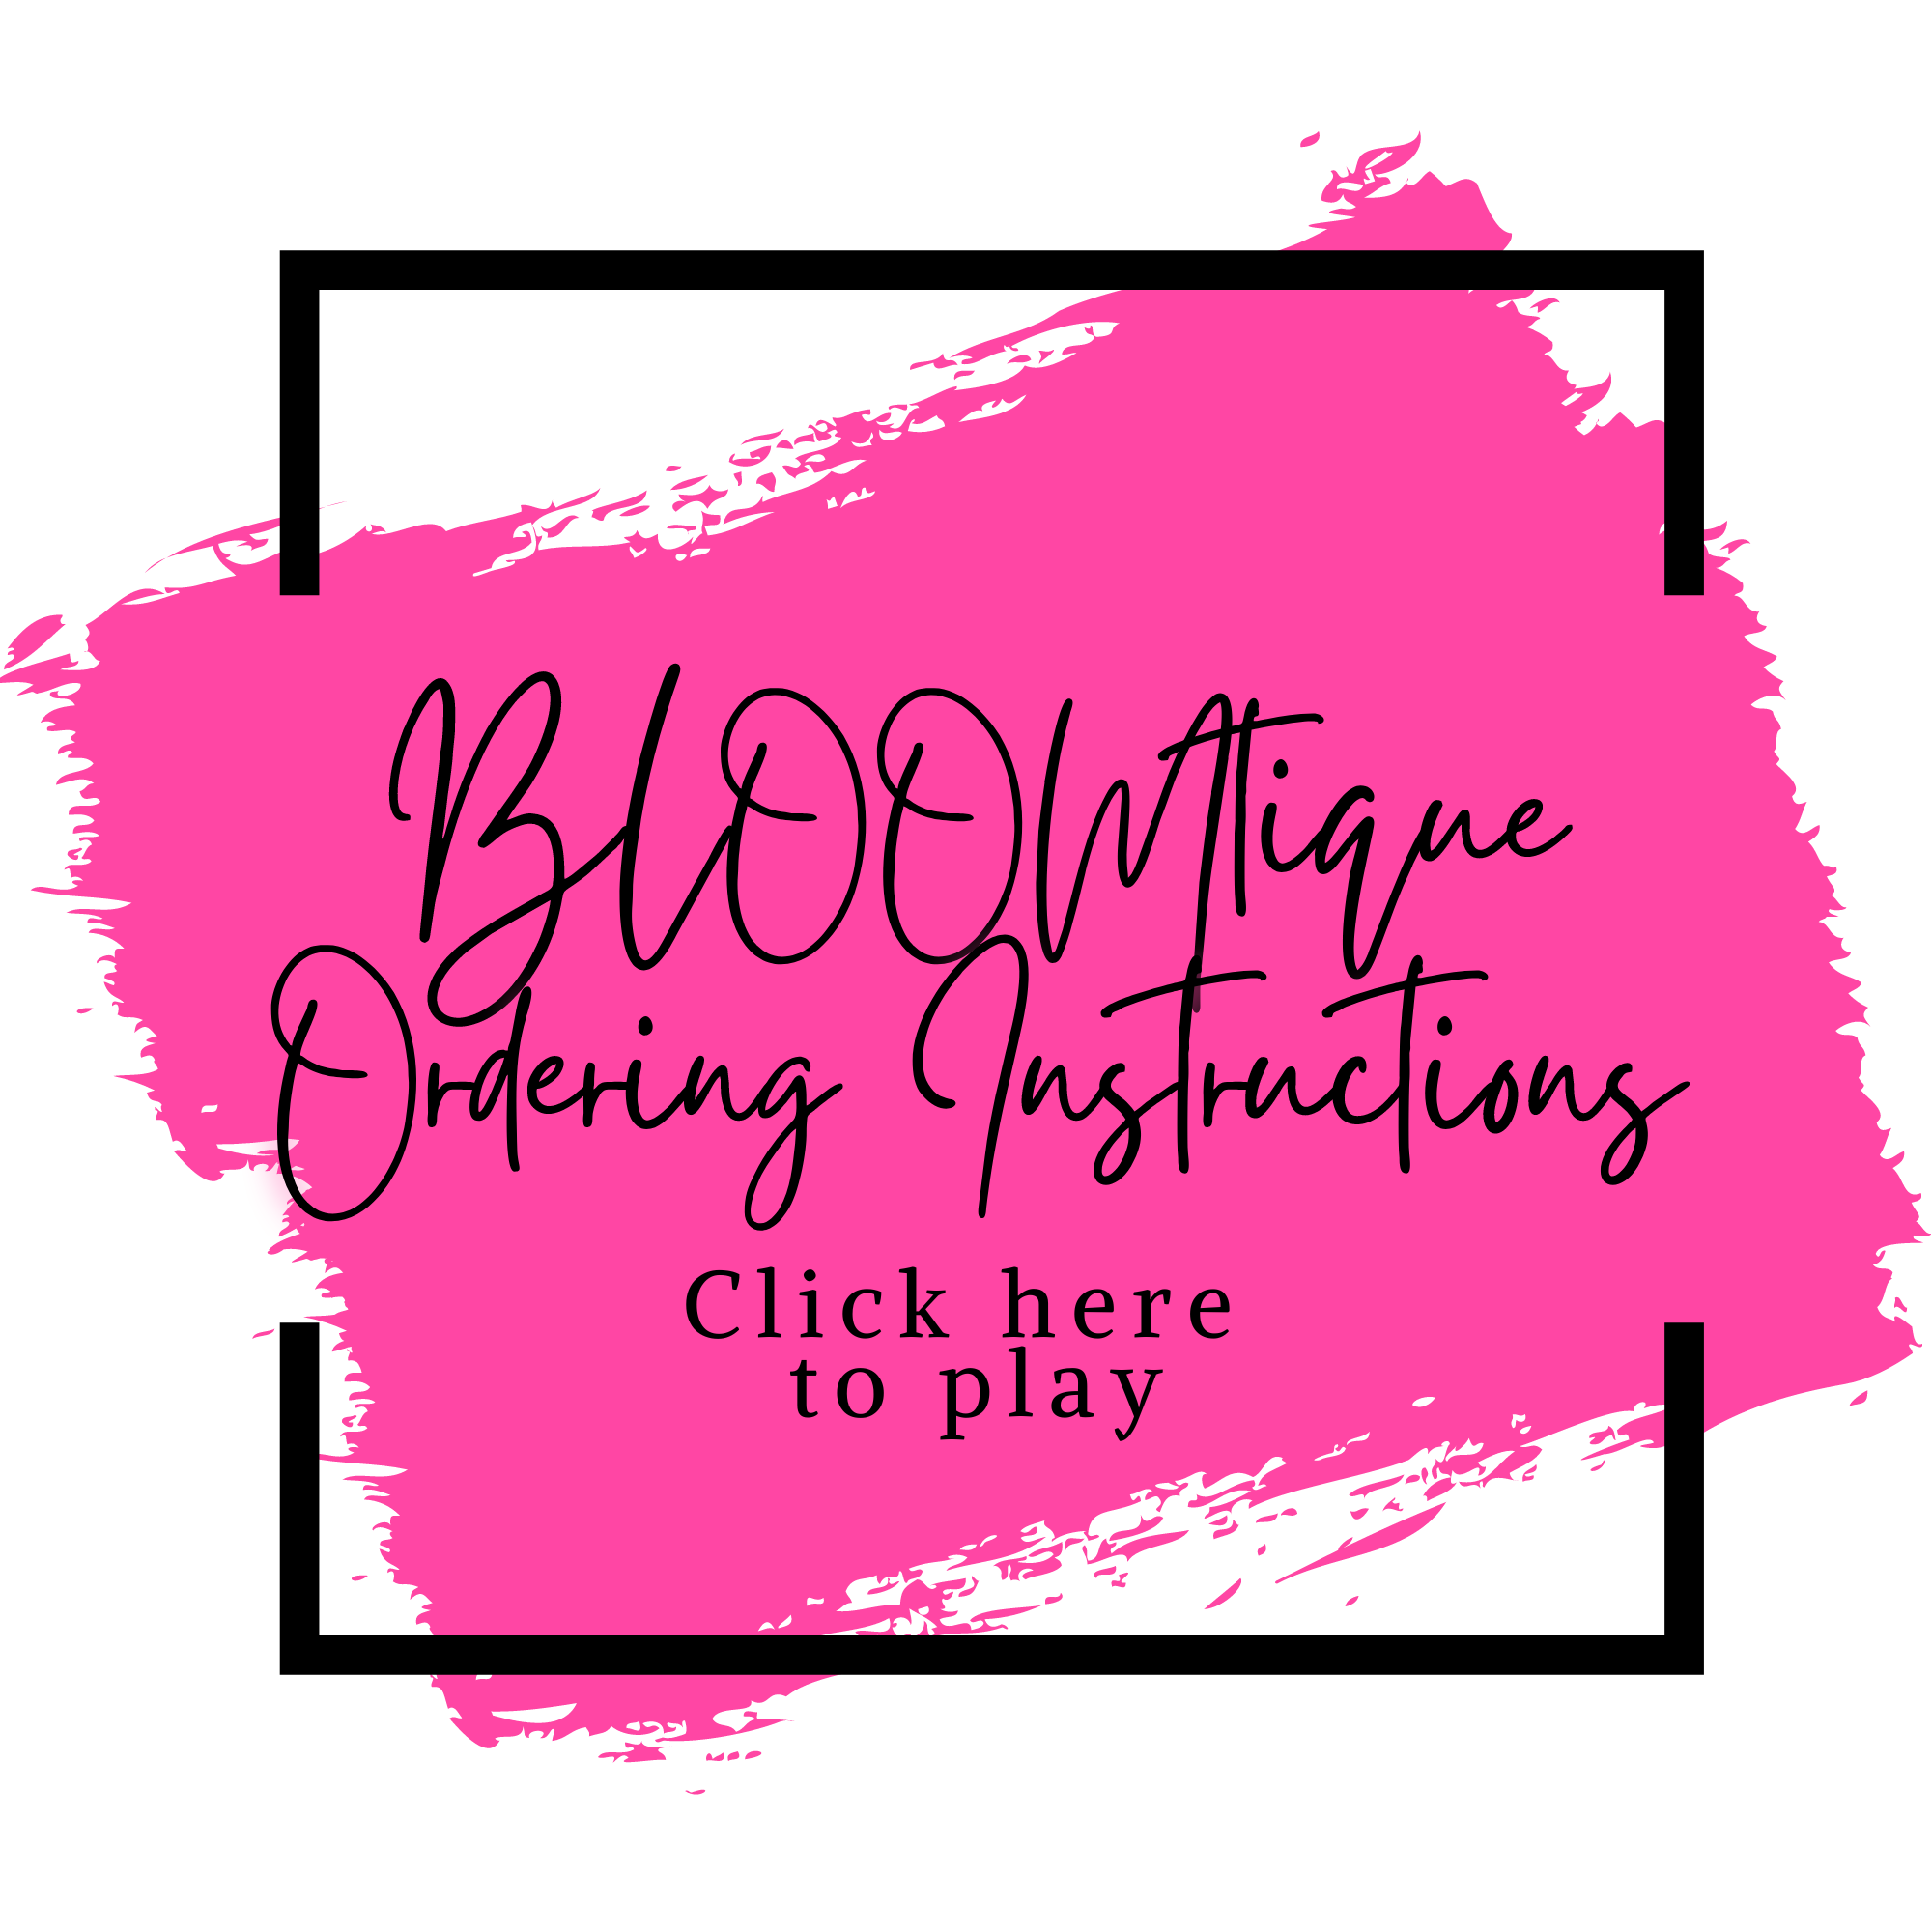 Load video: BLOOMtique Ordering Instructions